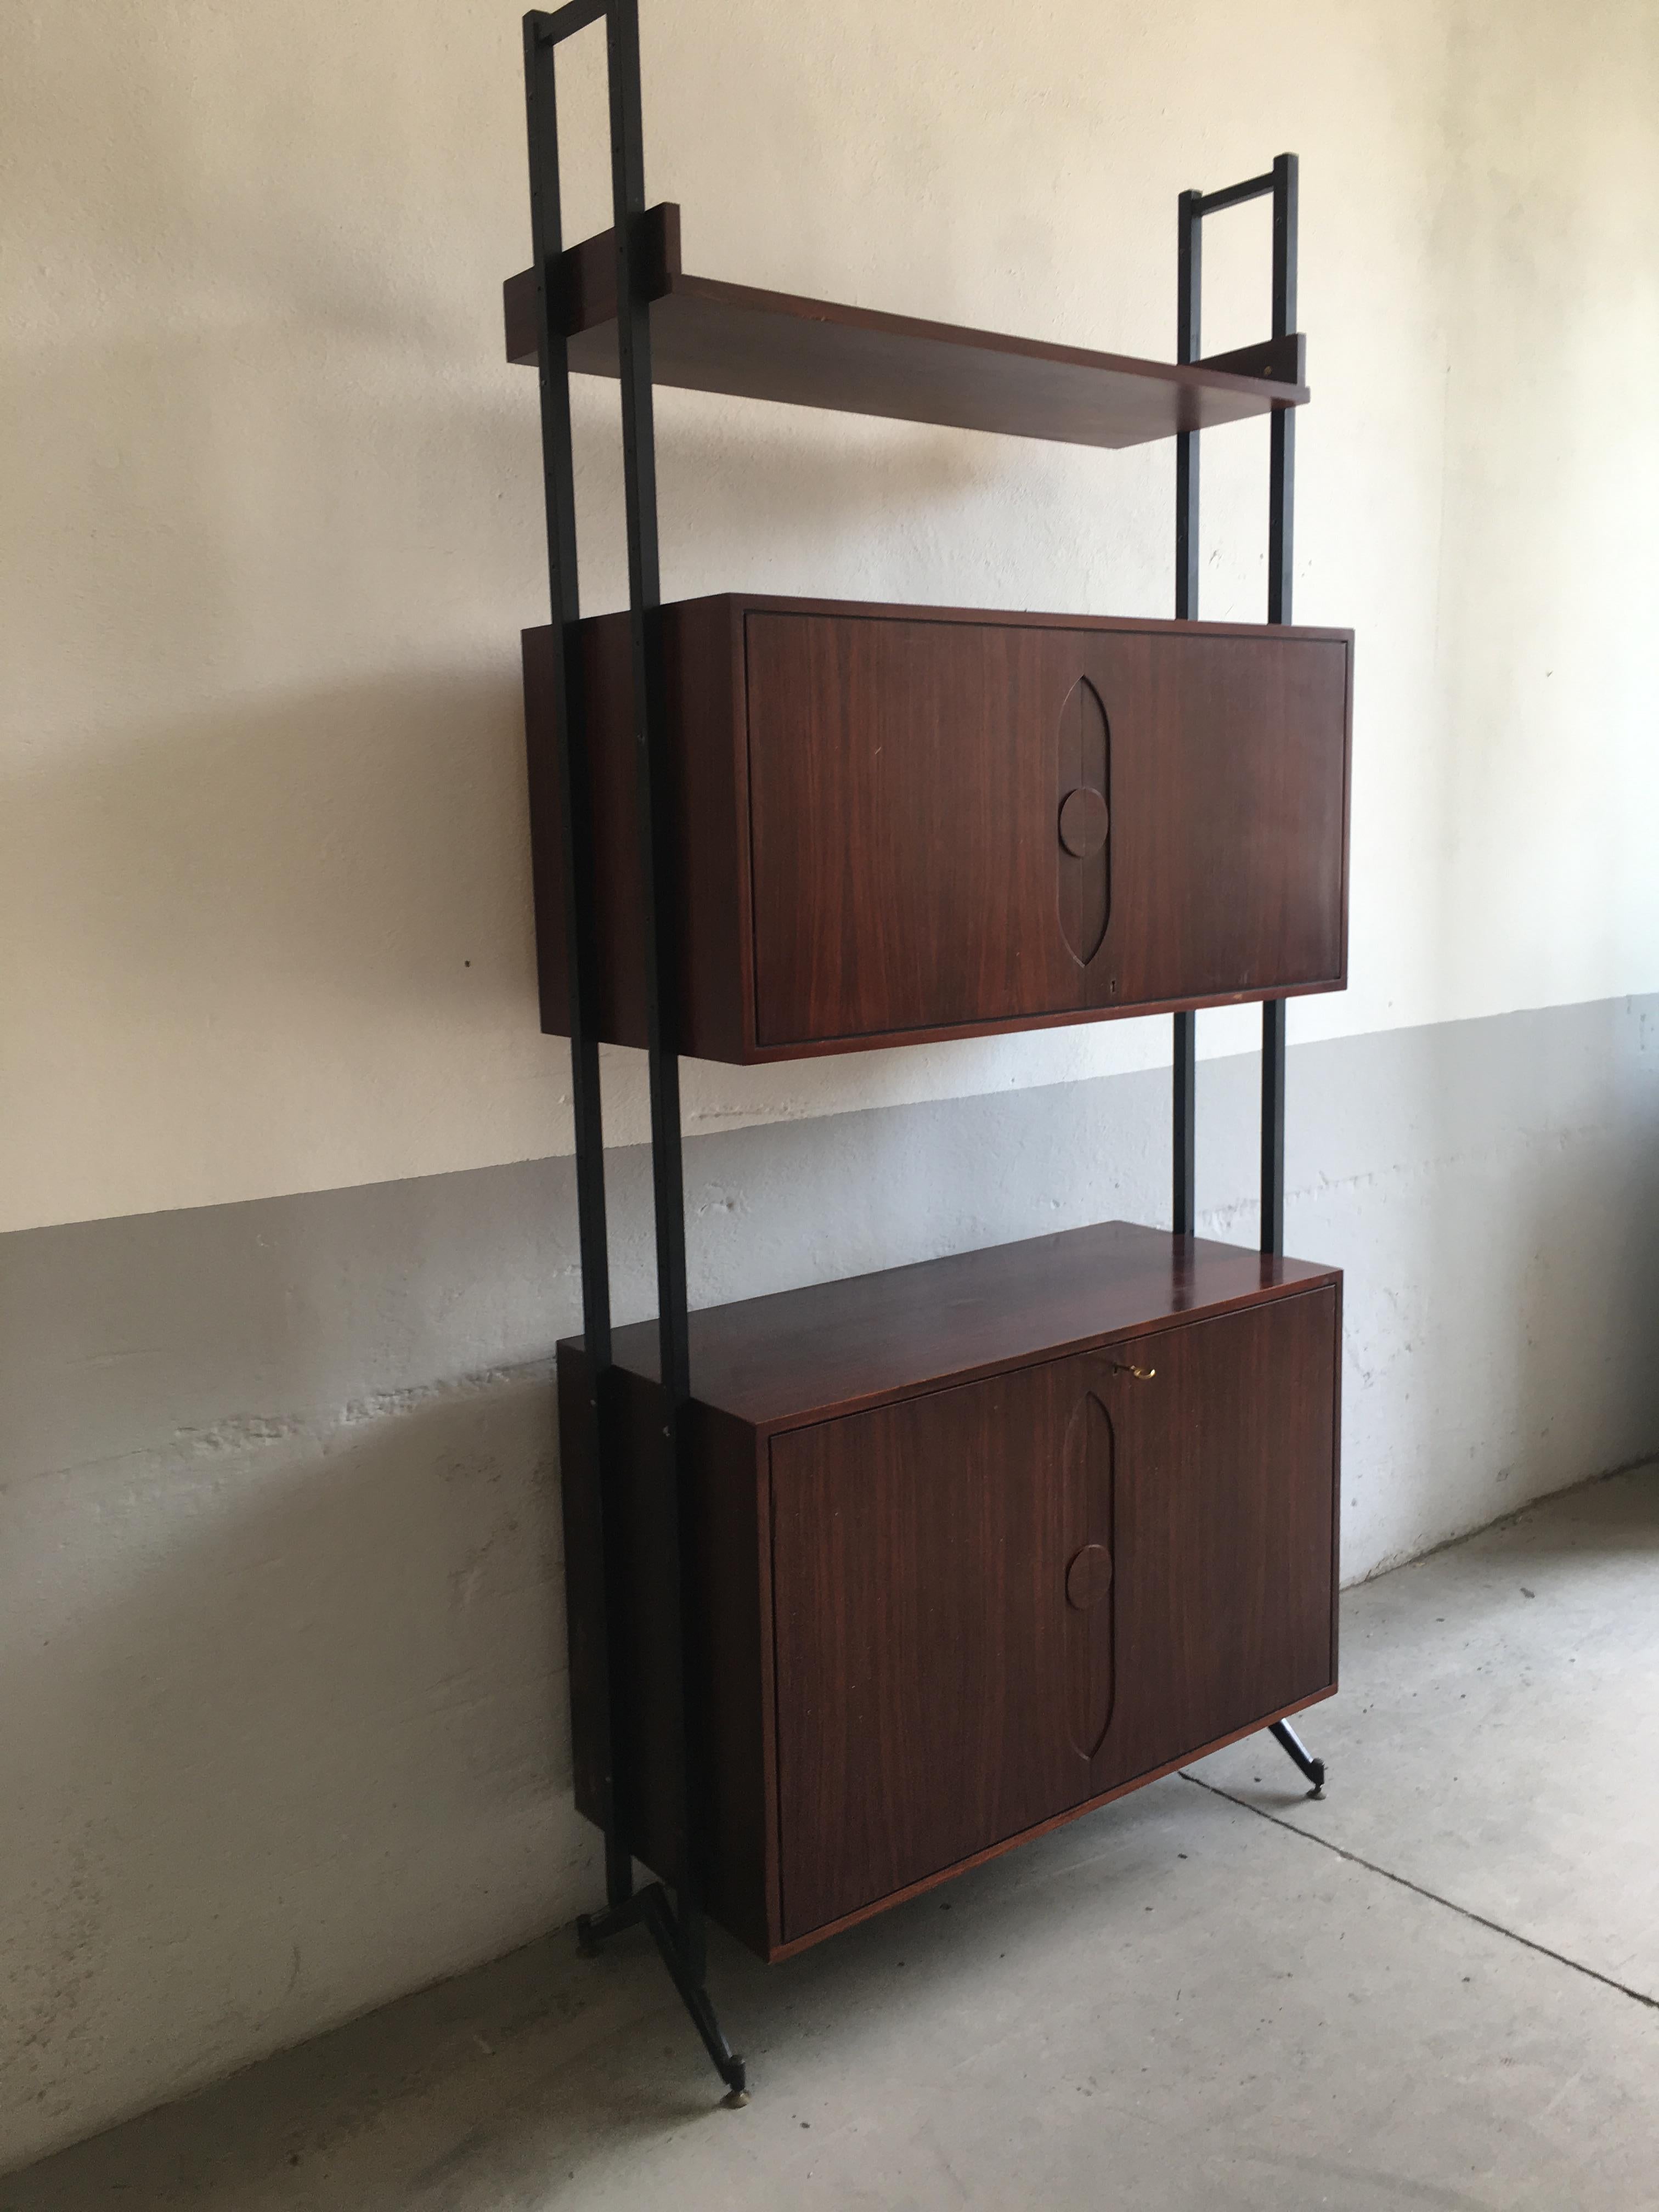 Lacquered Mid-Century Modern Danish Wood Wall Unit with Brass Feet, 1970s